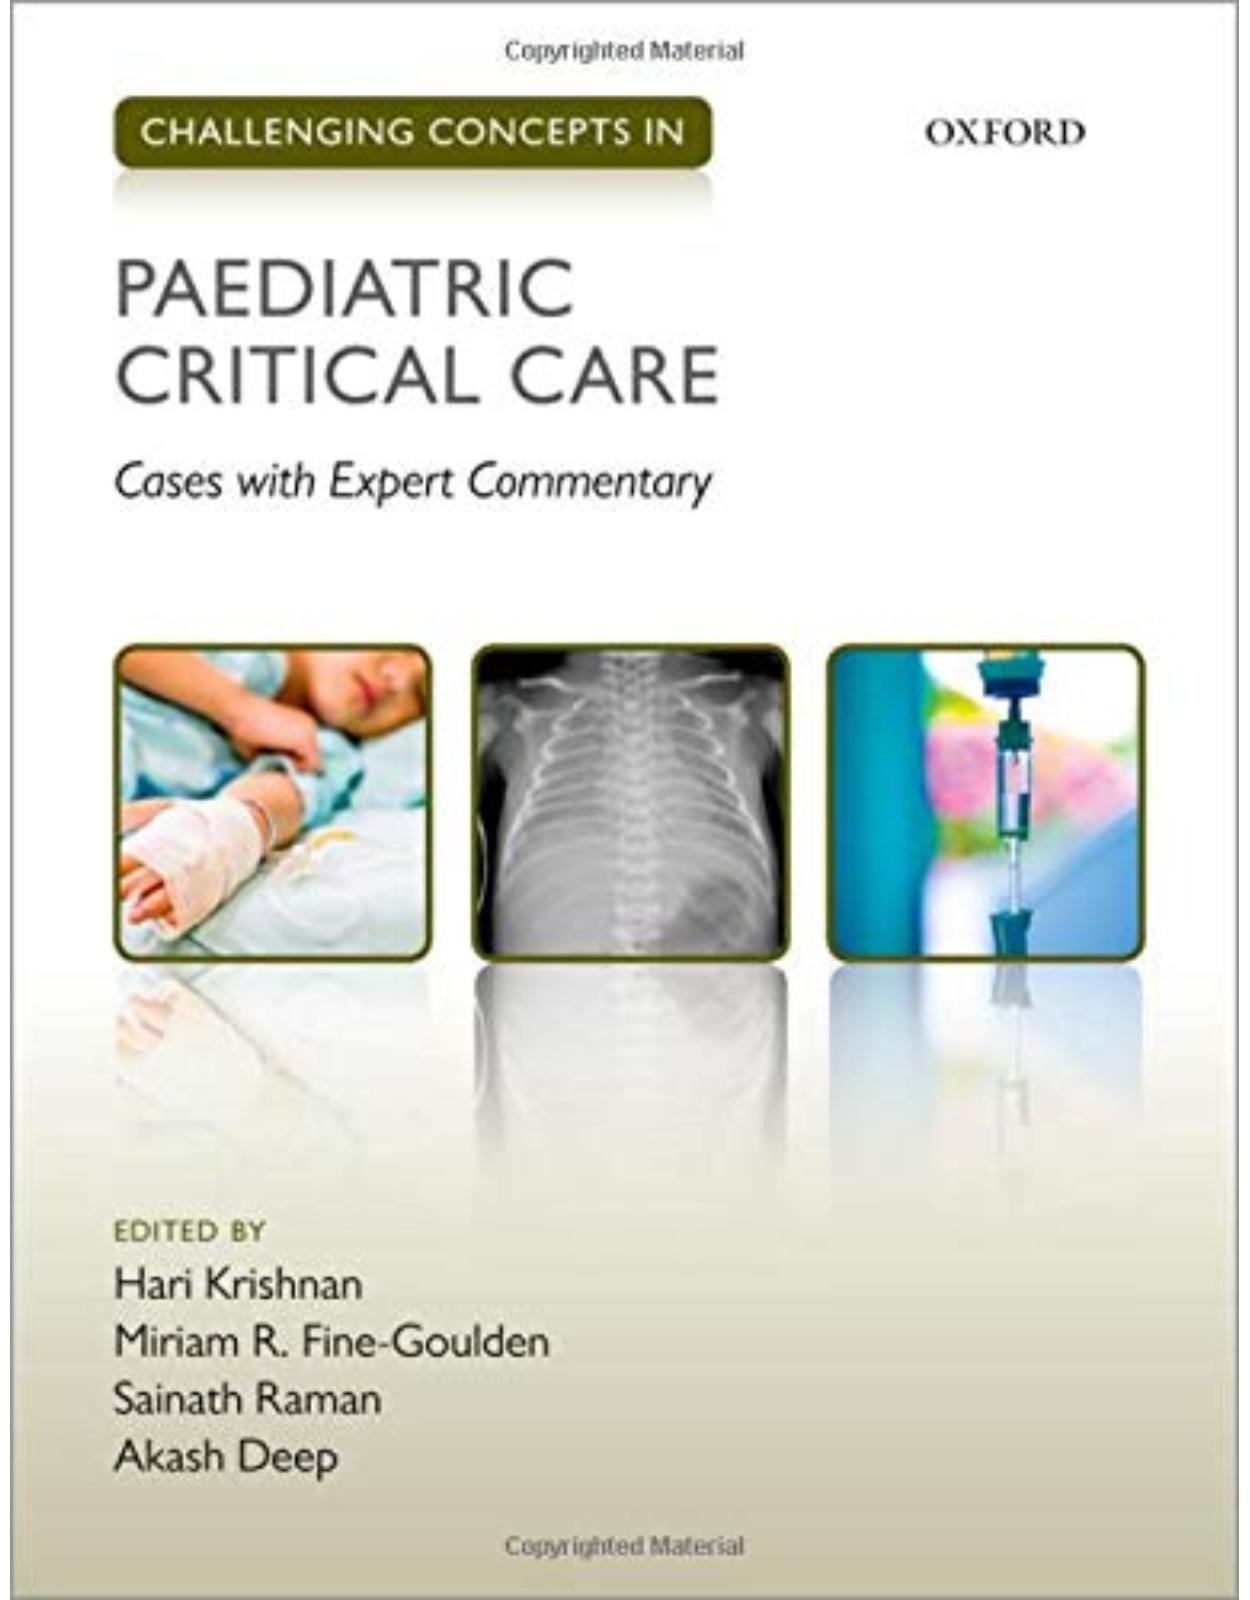 Challenging Concepts in Paediatric Critical Care: Cases with Expert Commentary